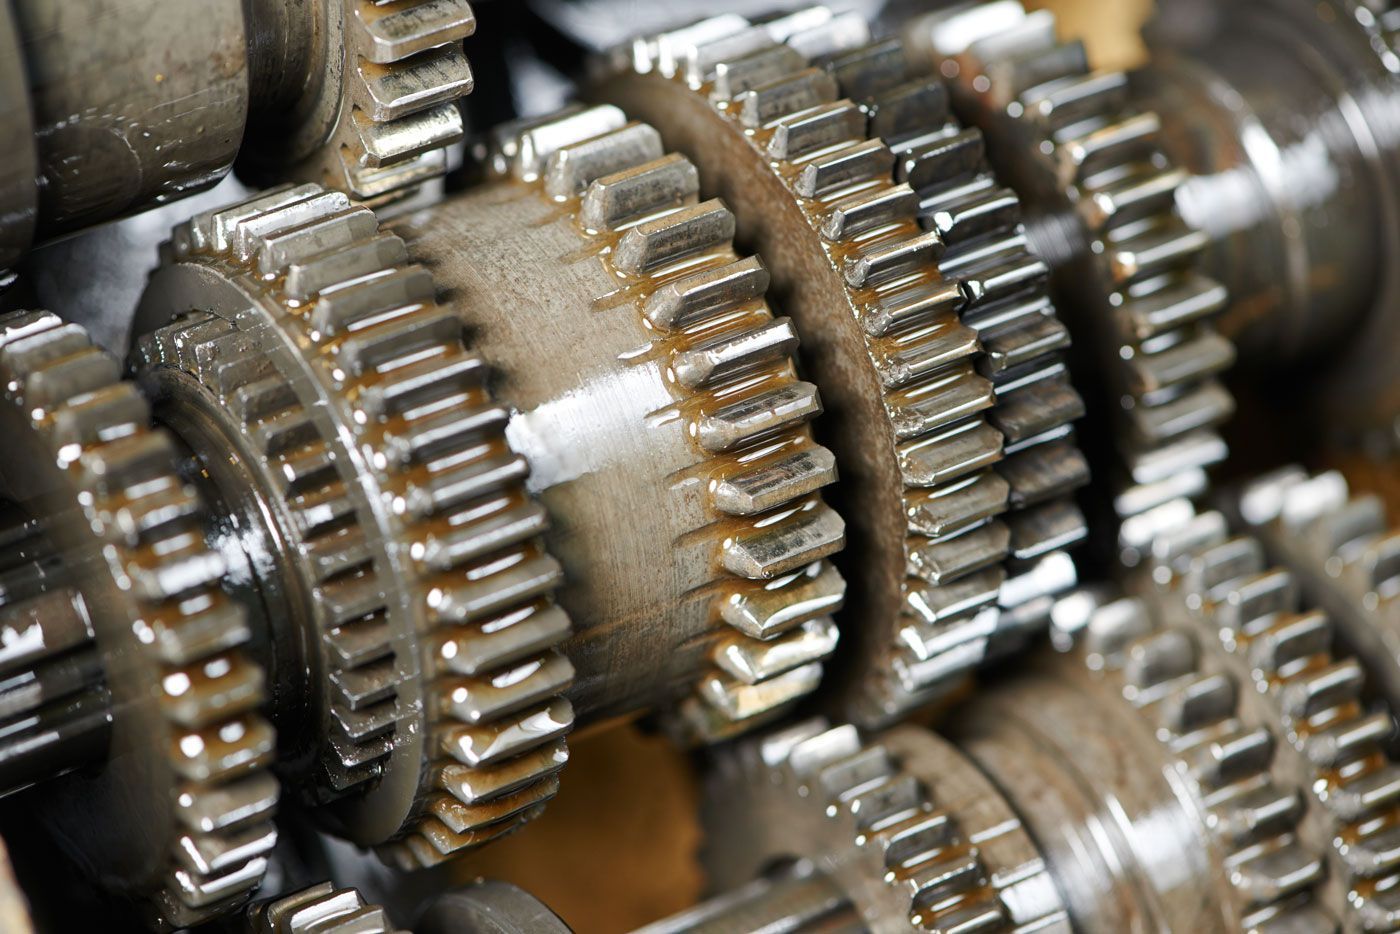 A close up of a row of gears in a machine.